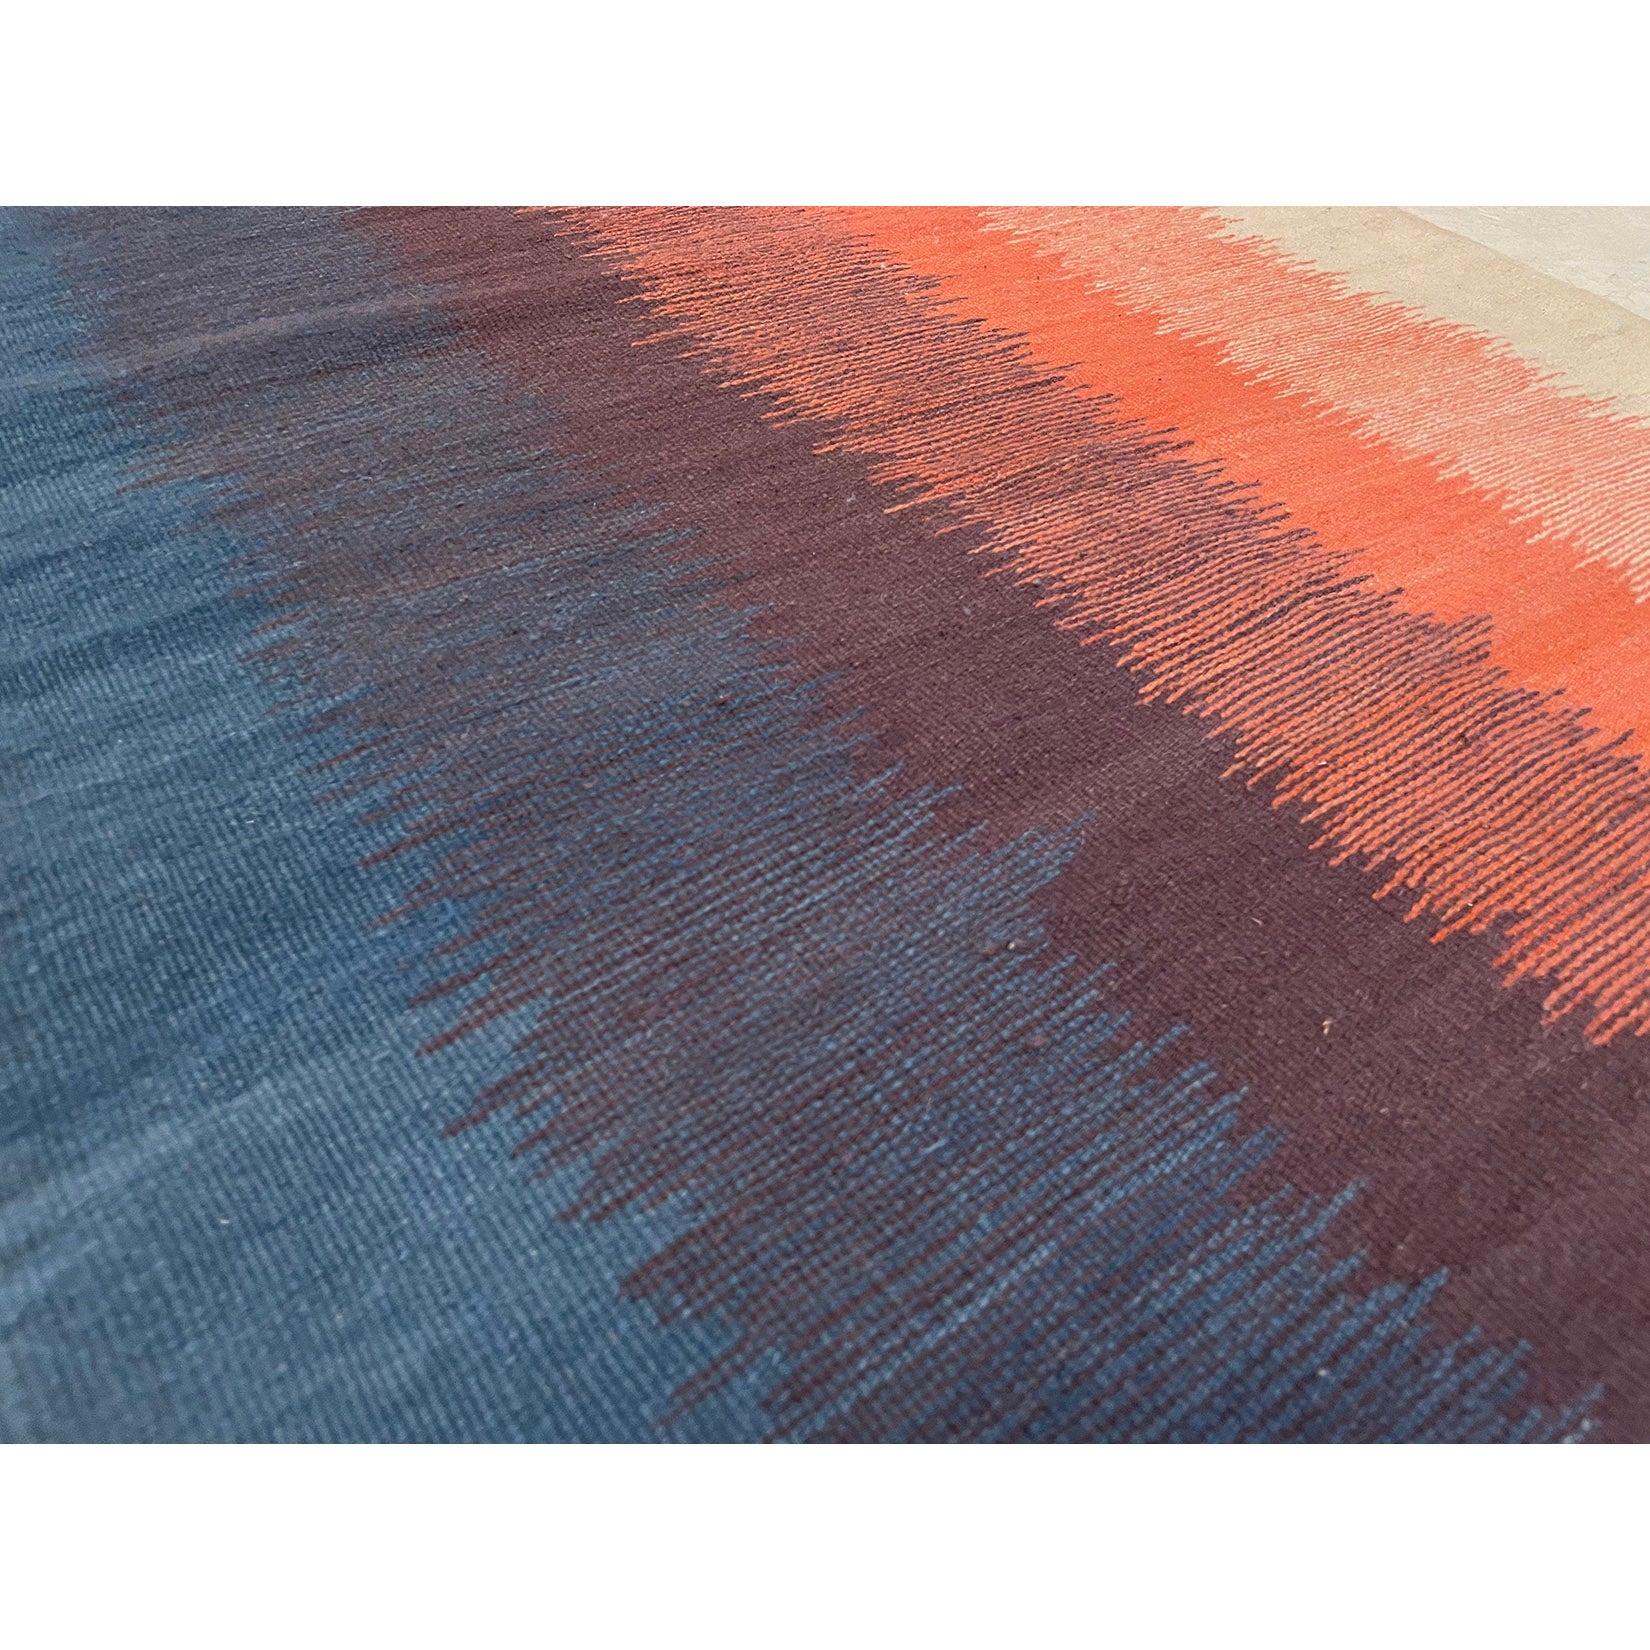 Closeup shot of this Moroccan runner rug with blue purple orange and cream vertical bands of color